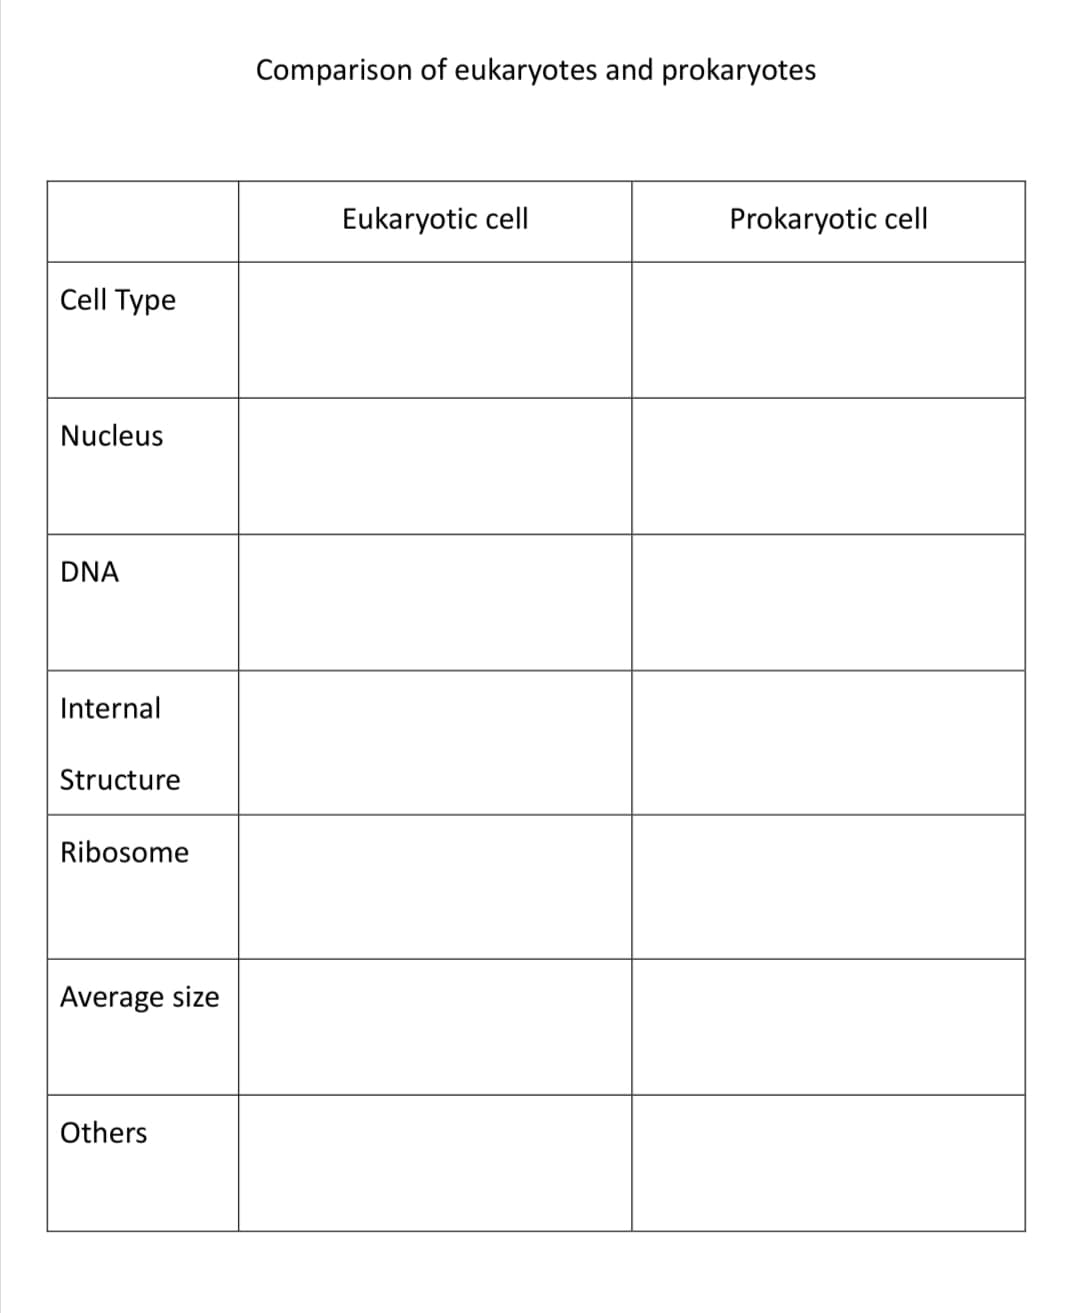 Comparison of eukaryotes and prokaryotes
Eukaryotic cell
Prokaryotic cell
Cell Type
Nucleus
DNA
Internal
Structure
Ribosome
Average size
Others
